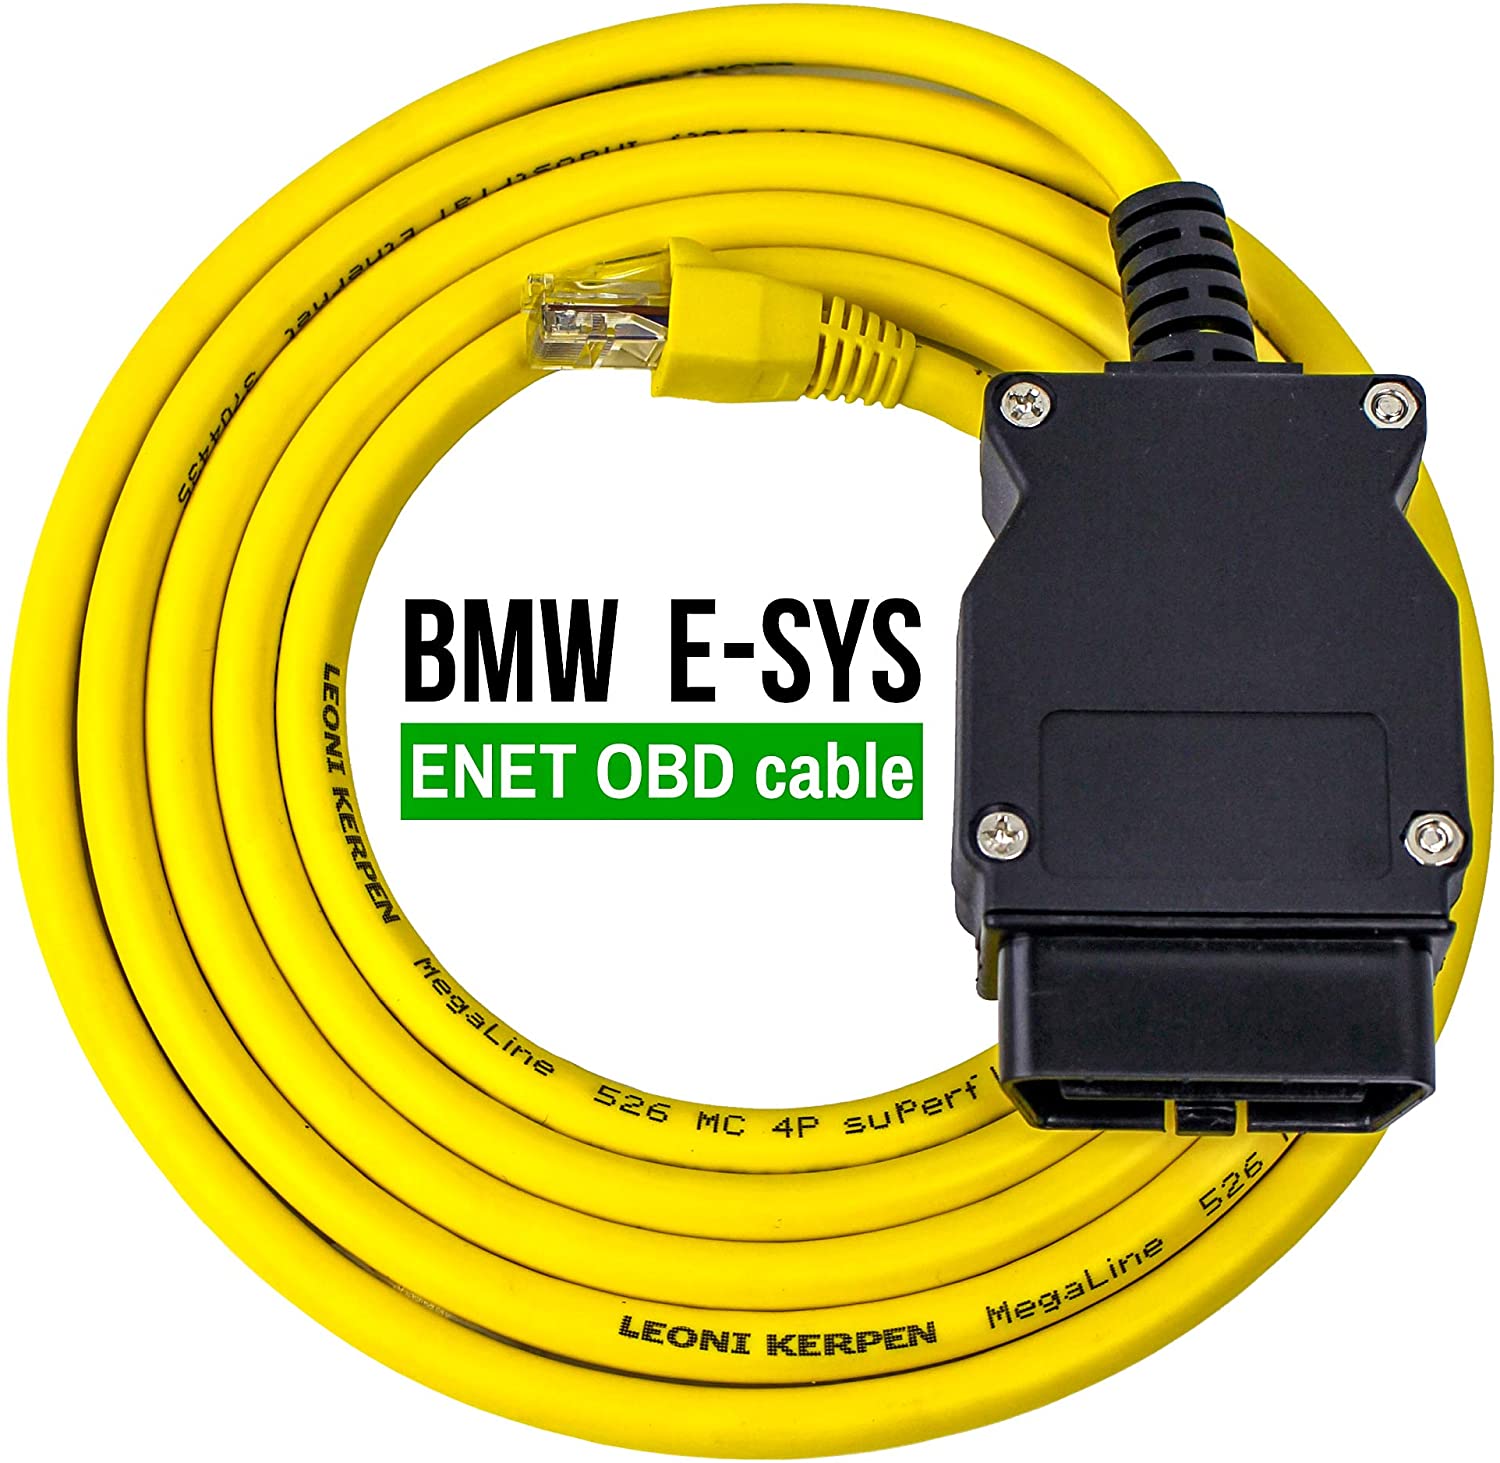 BMW ENET OBDII Cable | For Tuning With bootmod3 – Products - SouthernBM